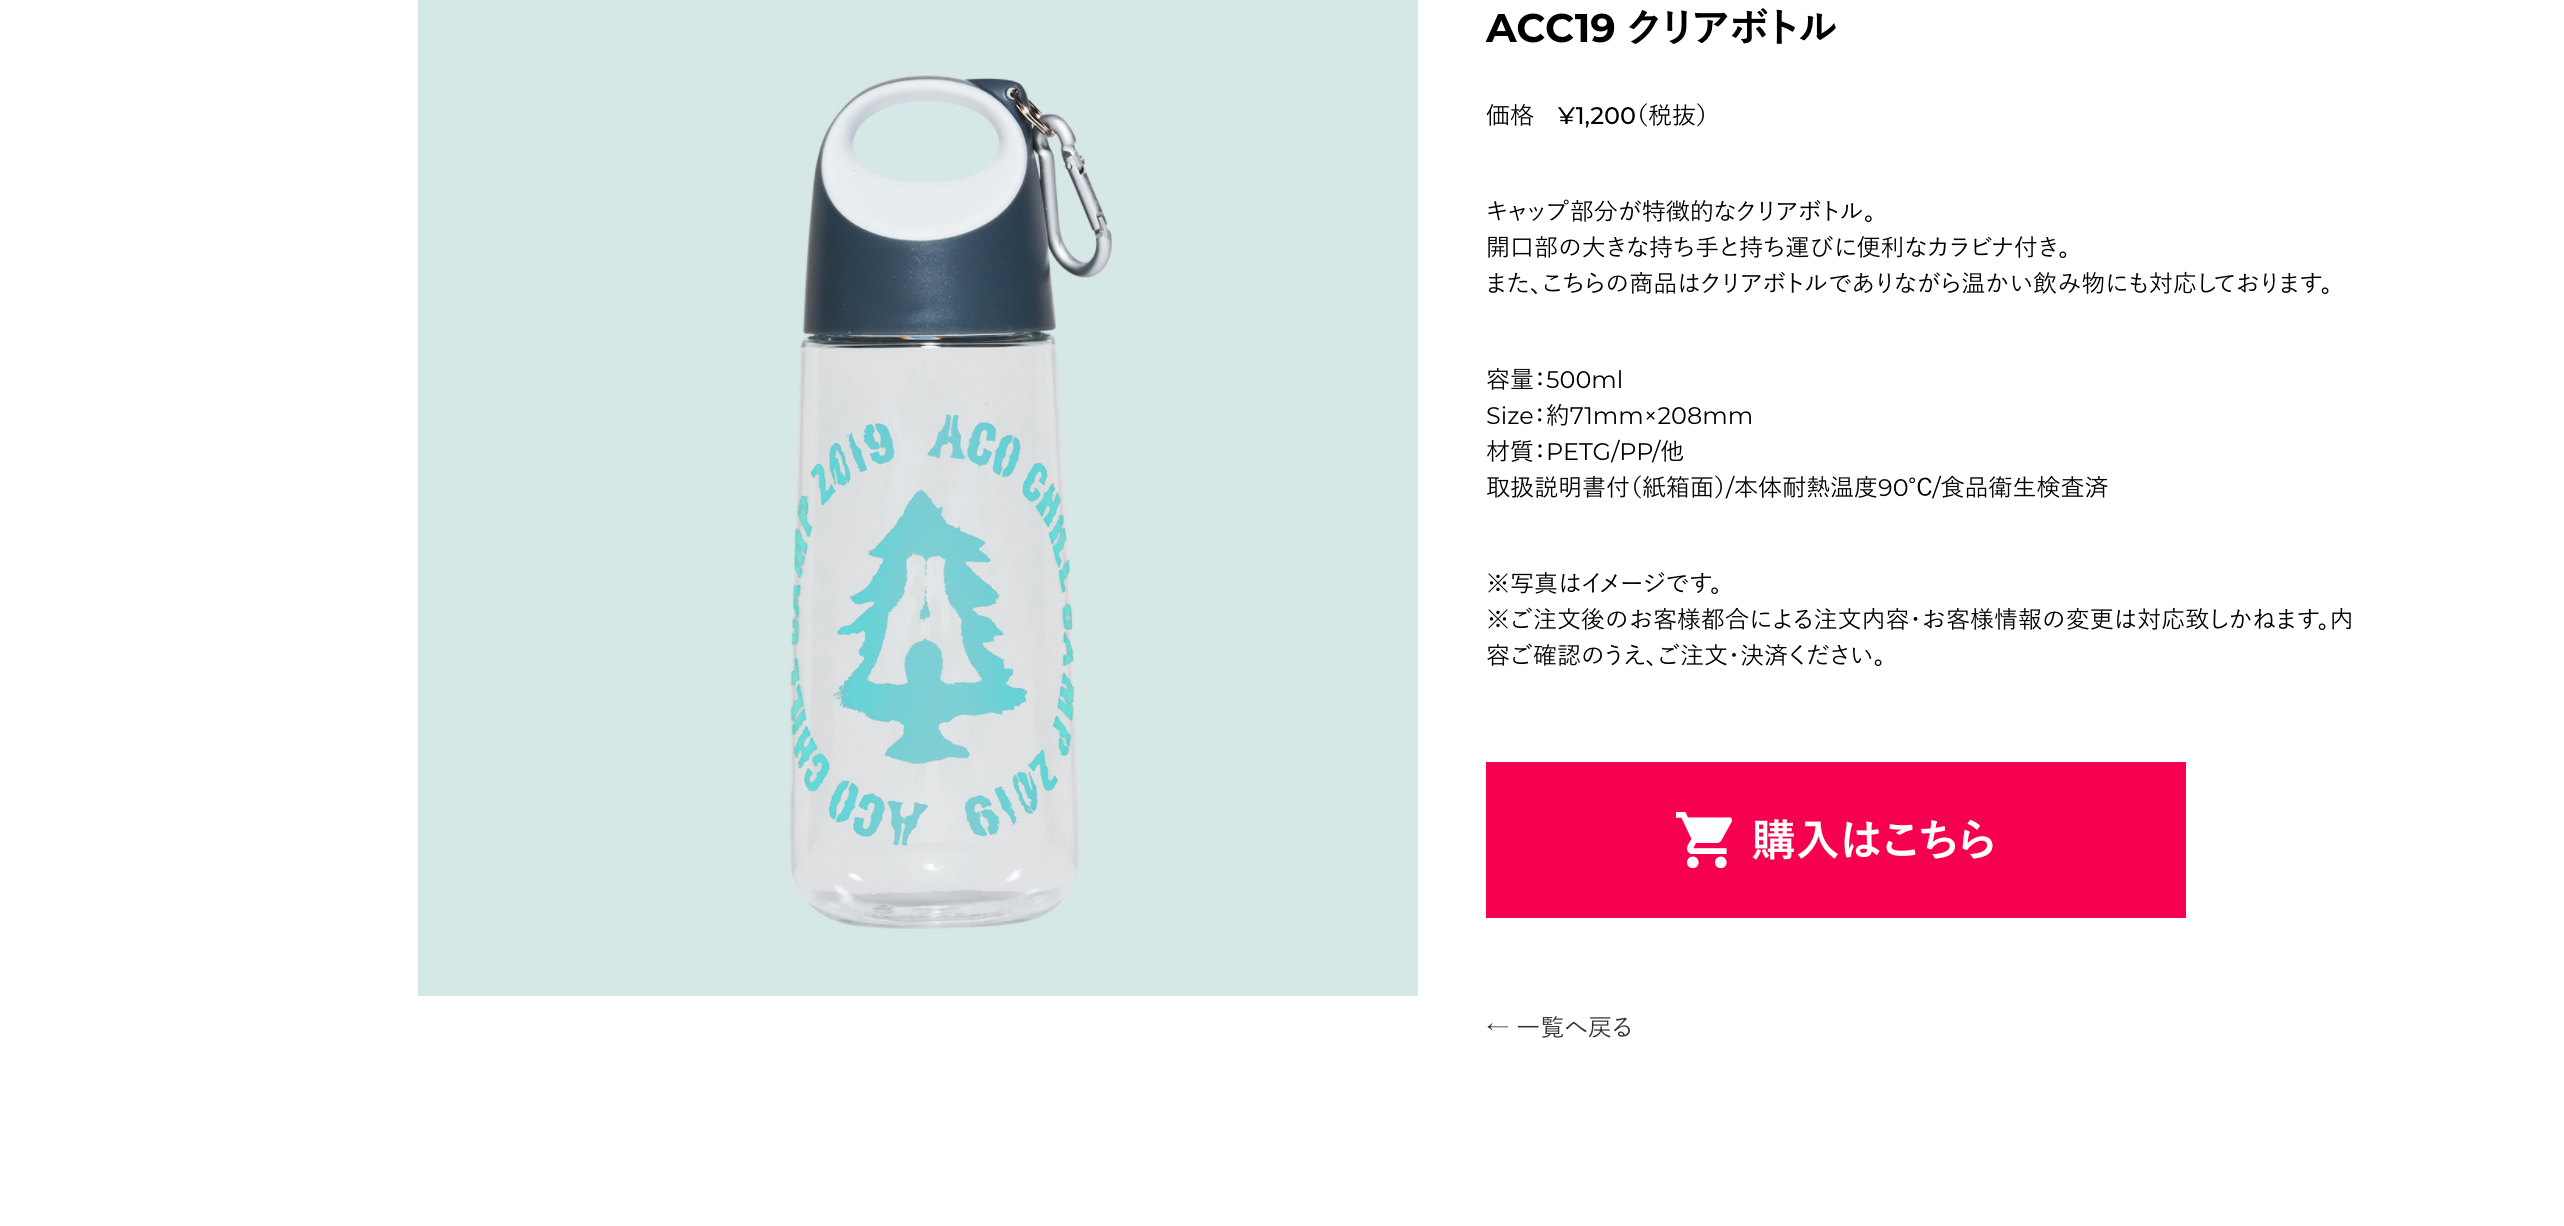 ACO CHiLL CAMP / GOODS